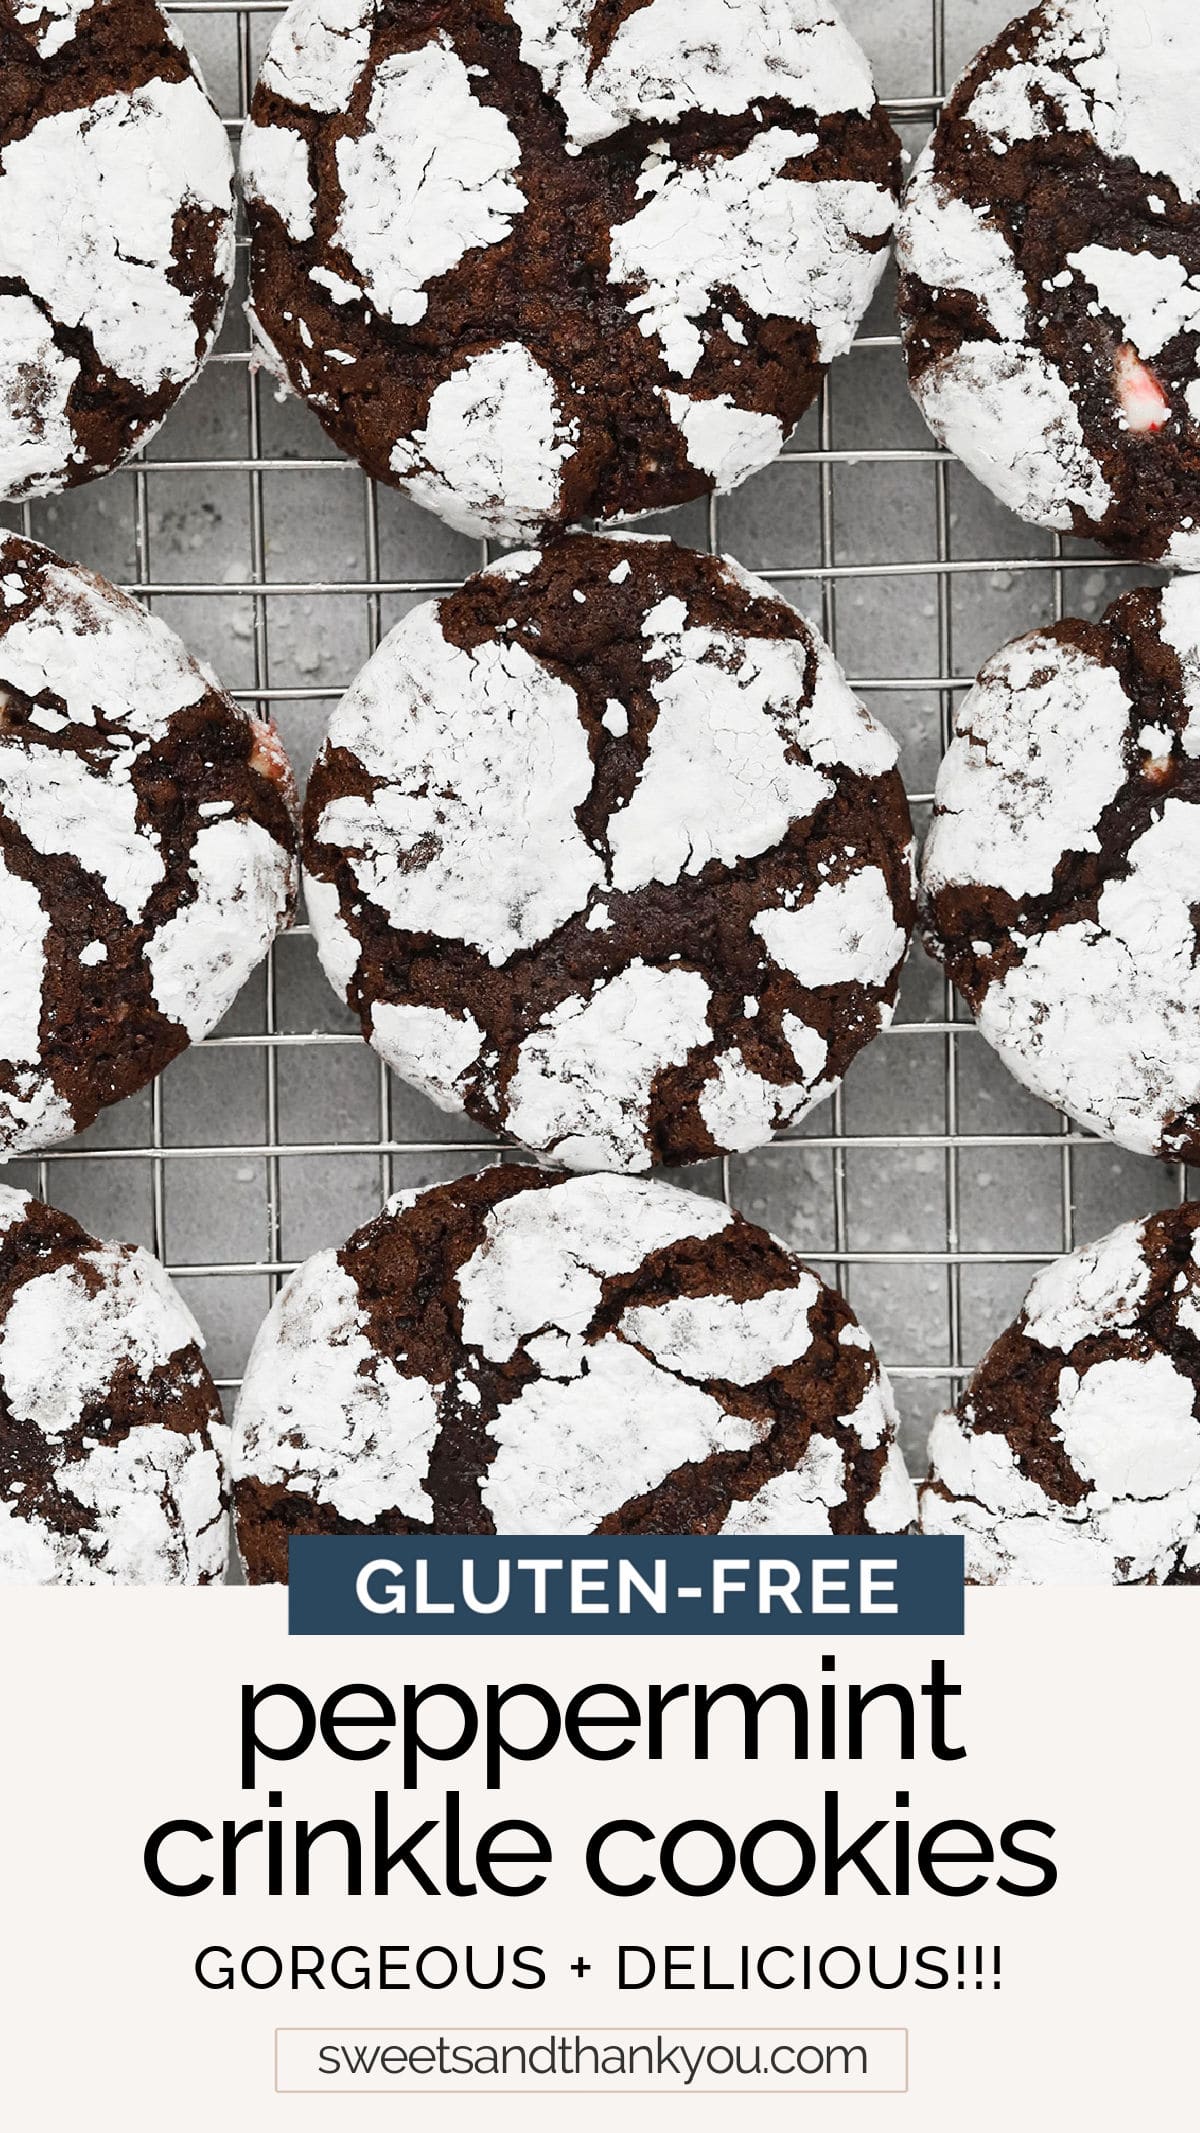 Gluten-Free Peppermint Chocolate Crinkle Cookies - Take best gluten-free chocolate crinkle cookies & give them a minty twist for the holidays! // gluten-free holiday cookies // gluten free peppermint crinkles // gluten free crinkles // gluten-free chocolate cookies 